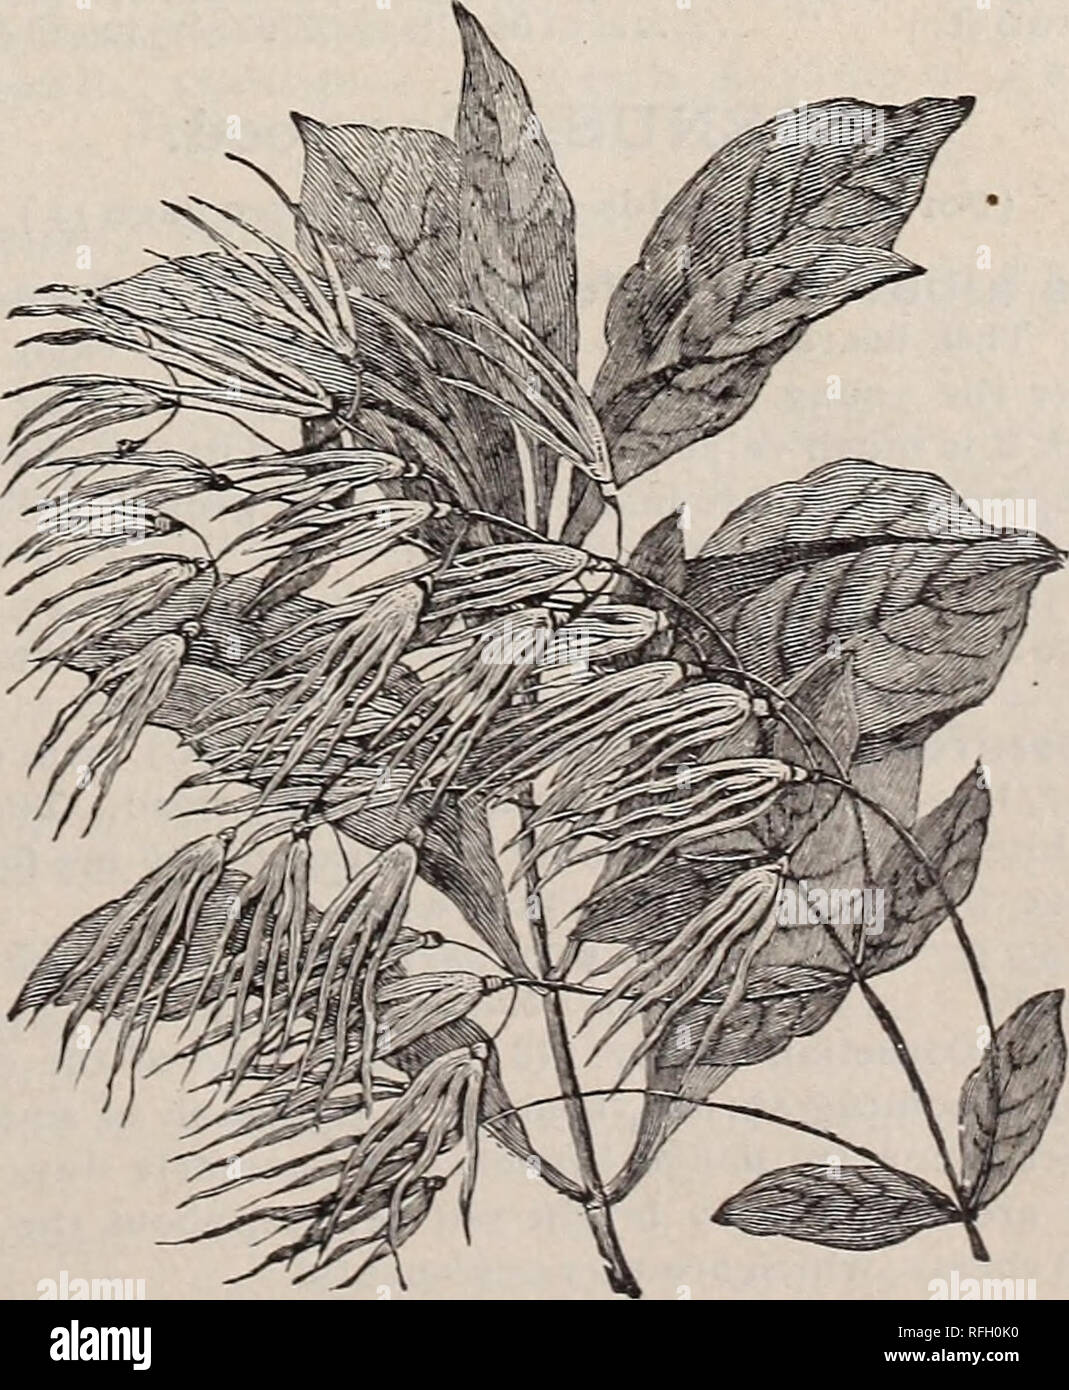 . Descriptive catalogue of ornamental trees, shrubs, vines, evergreens, hardy plants and fruits. Nurseries (Horticulture), Pennsylvania, Catalogs; Trees, Seedlings, Catalogs; Ornamental shrubs, Catalogs; Flowers, Catalogs; Plants, Ornamental, Catalogs; Fruit, Catalogs. CBPHALANTHUS. Cephalanthus occidentalis. (4 to 5 ft.) a good sized native shrub, bearing globular heads of white flowers about the middle of July, which are similar in appearance to those of a Buttonball tree. It is largely used for giving a natural effect to plantings. 12 to 18 in. Trans $ 25 each $1 50 per 10 $10 00 per 100 18 Stock Photo